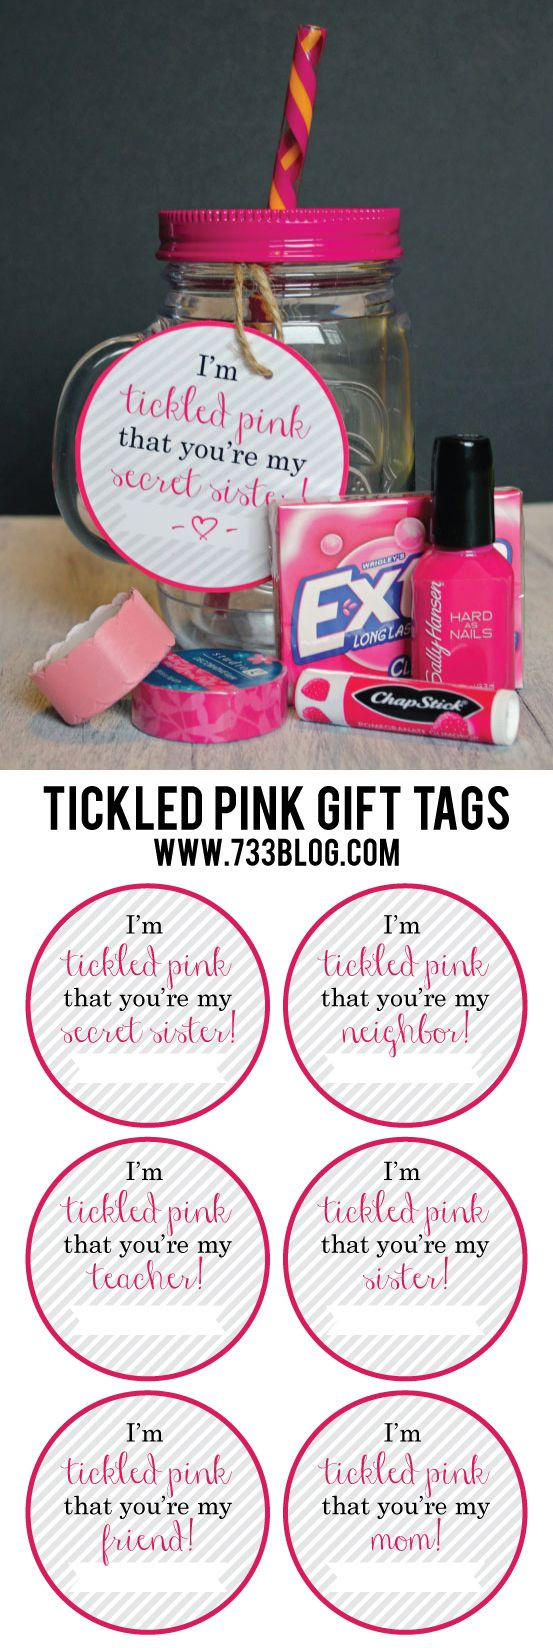 Free Gift Ideas For Girlfriend
 Tickled Pink Gift Idea